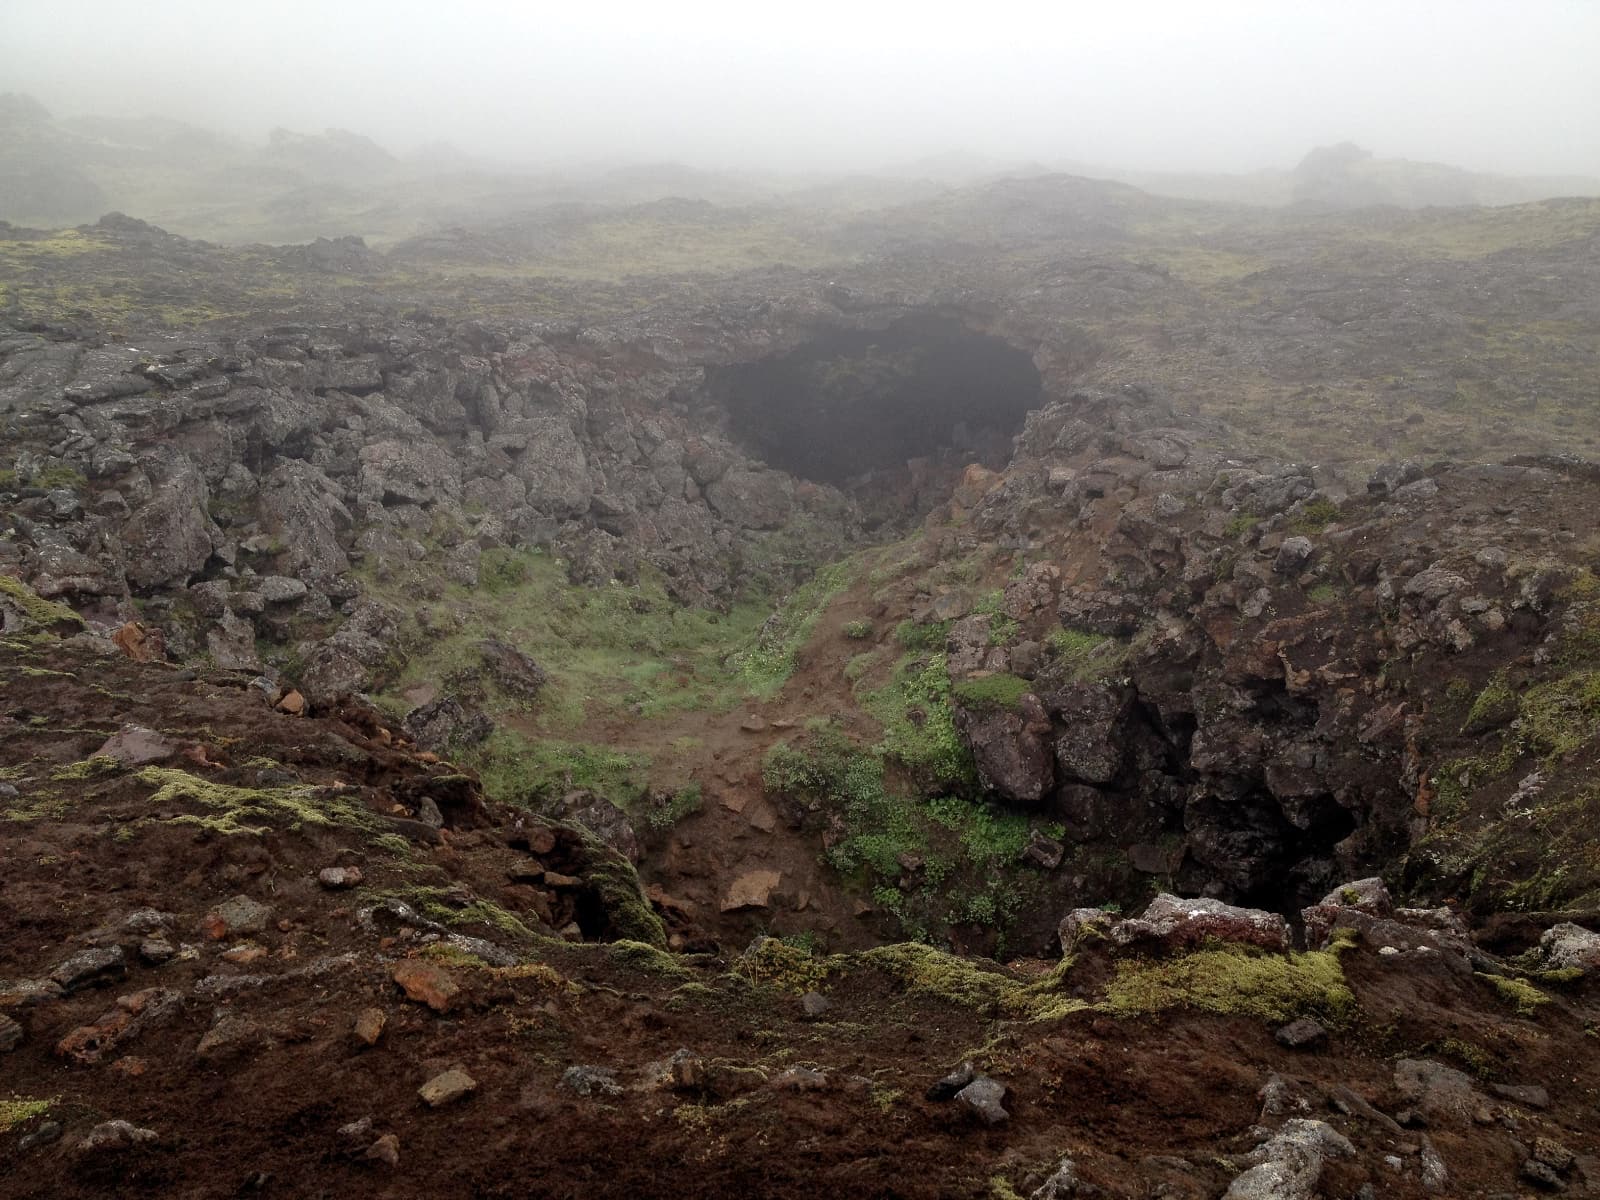 Very rugged terrain with person-sized holes where lava once flowed